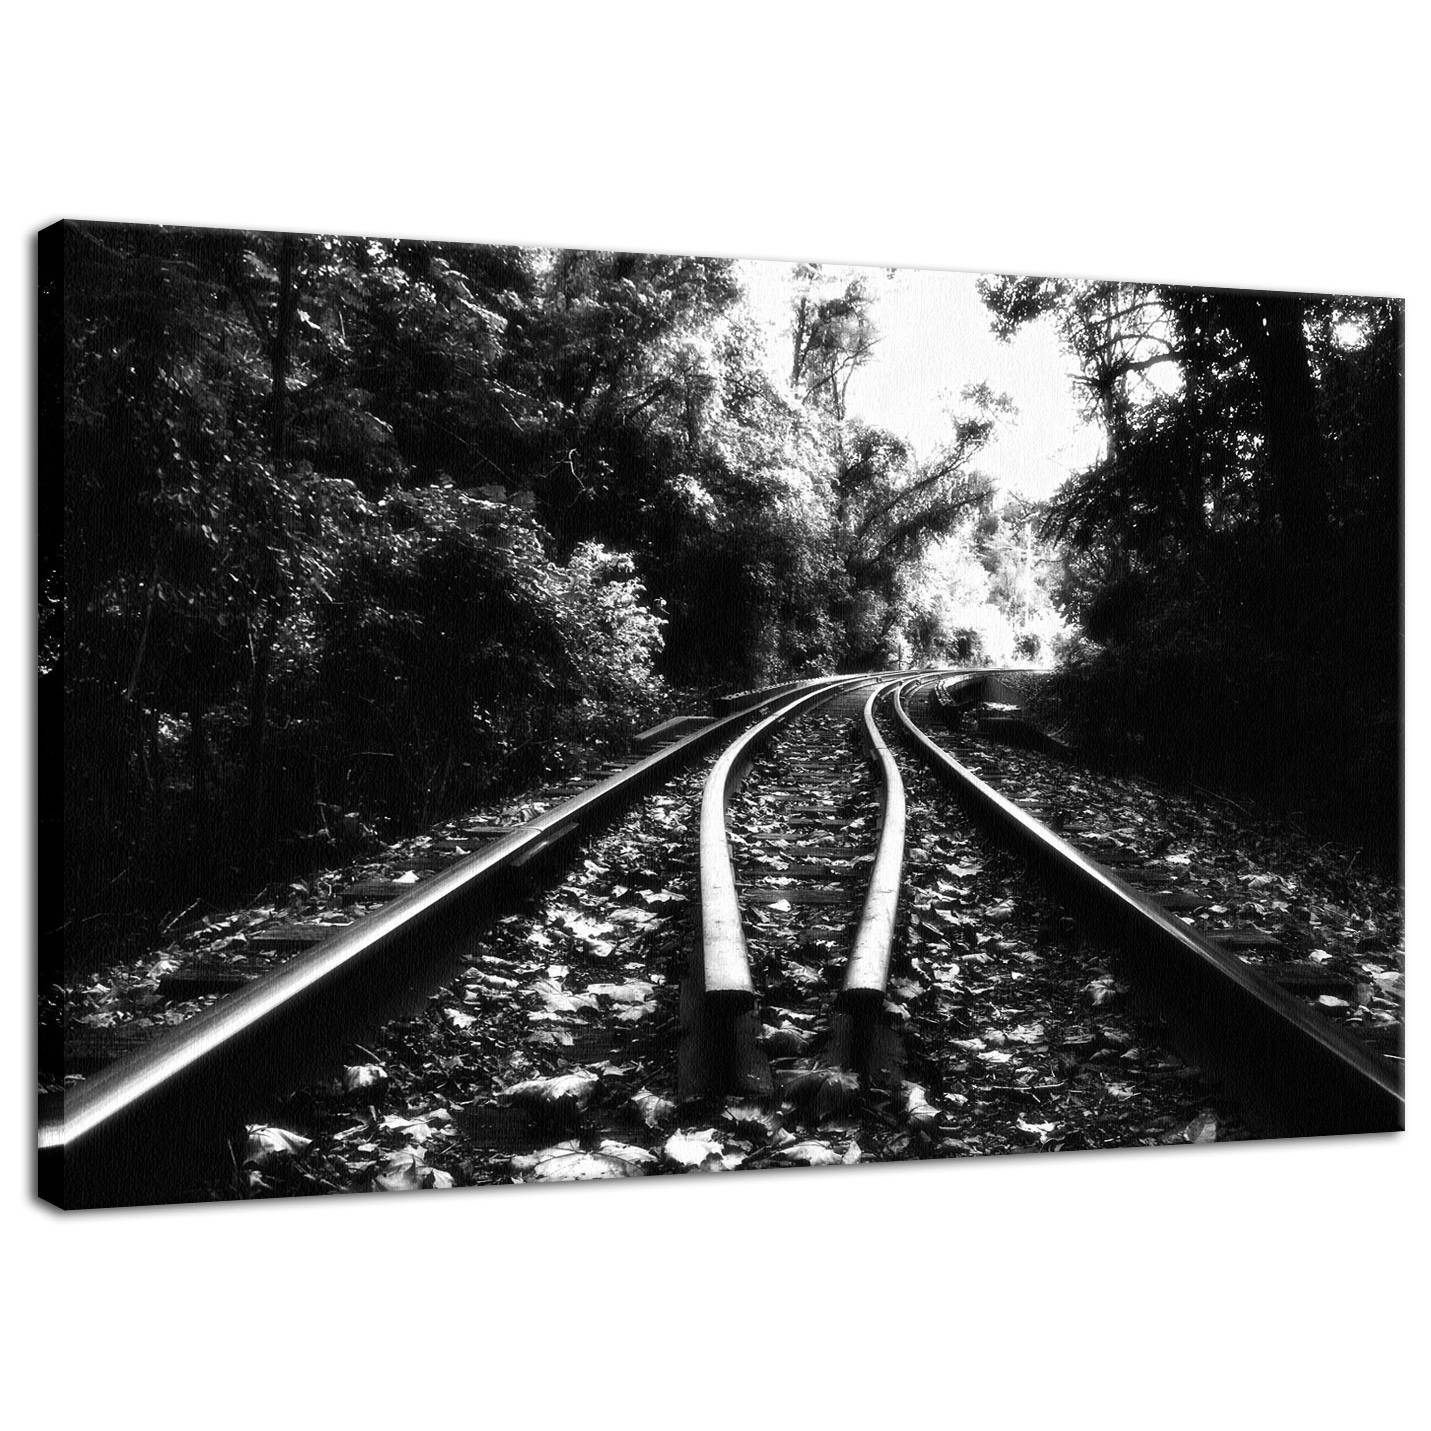 Lead Me Into The Light in Black and White Rural Landscape Fine Art Canvas Wall Art Prints  - PIPAFINEART